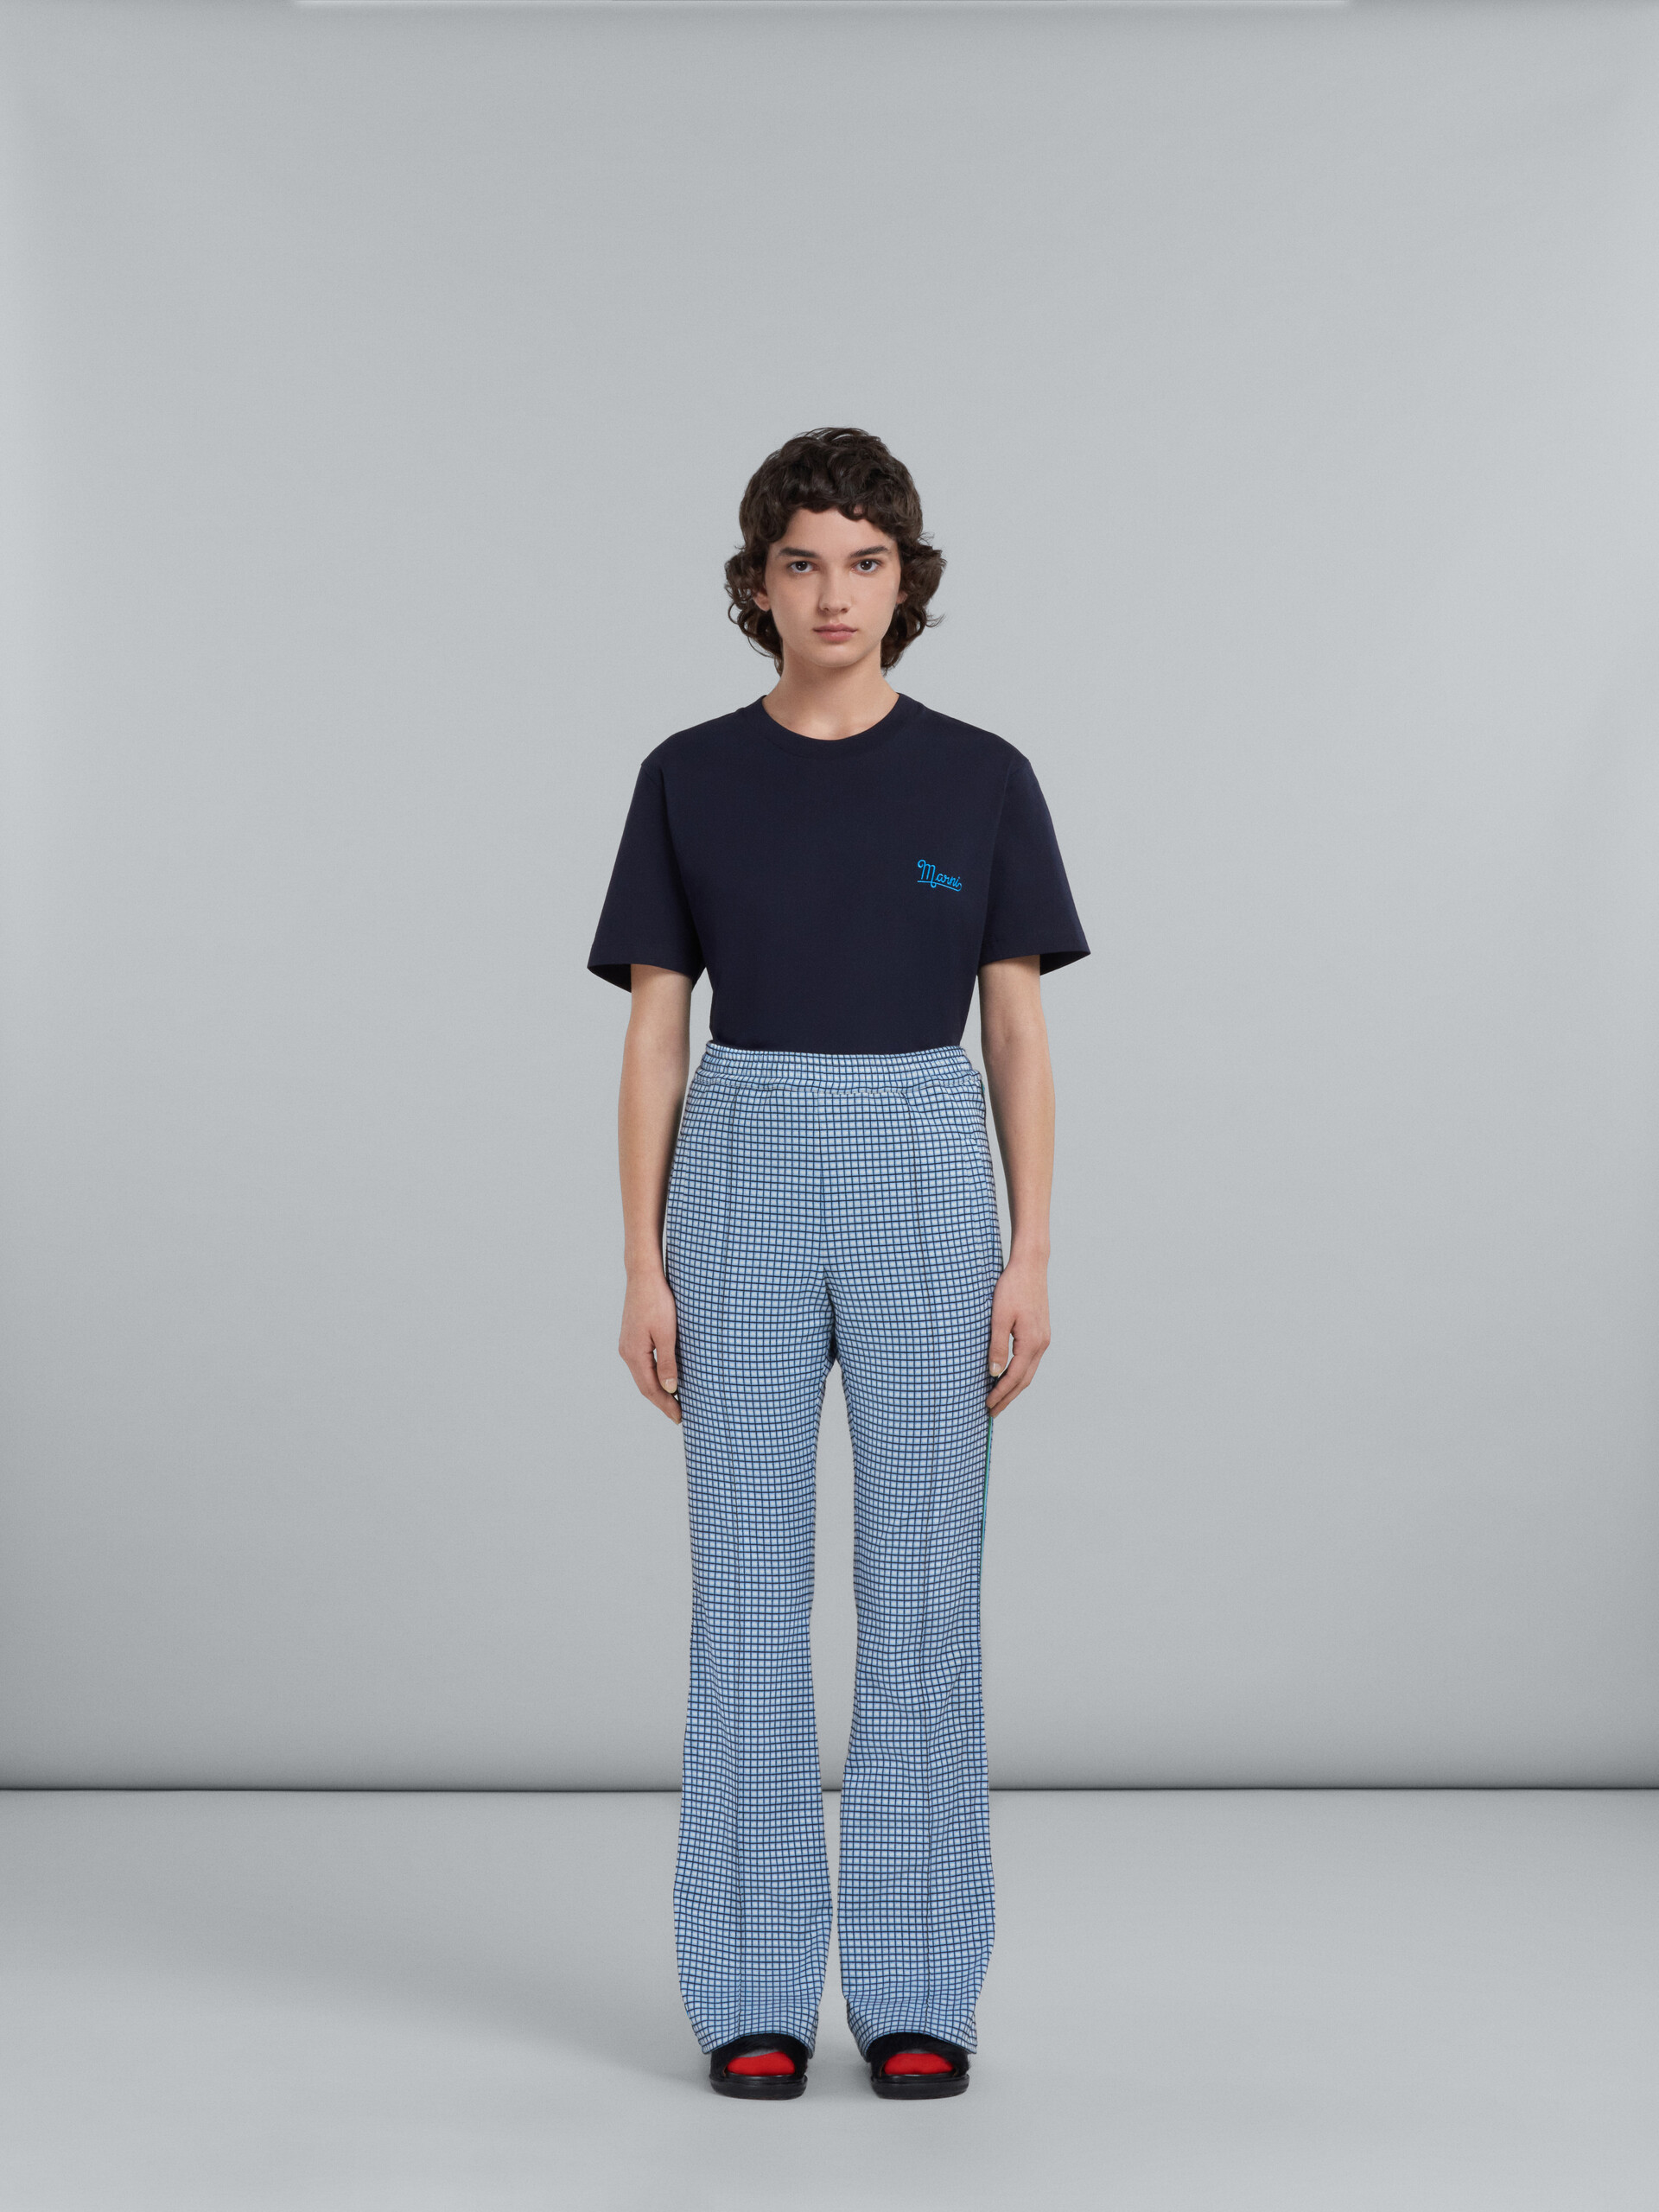 Flared trousers in light blue jacquard fabric - Pants - Image 2